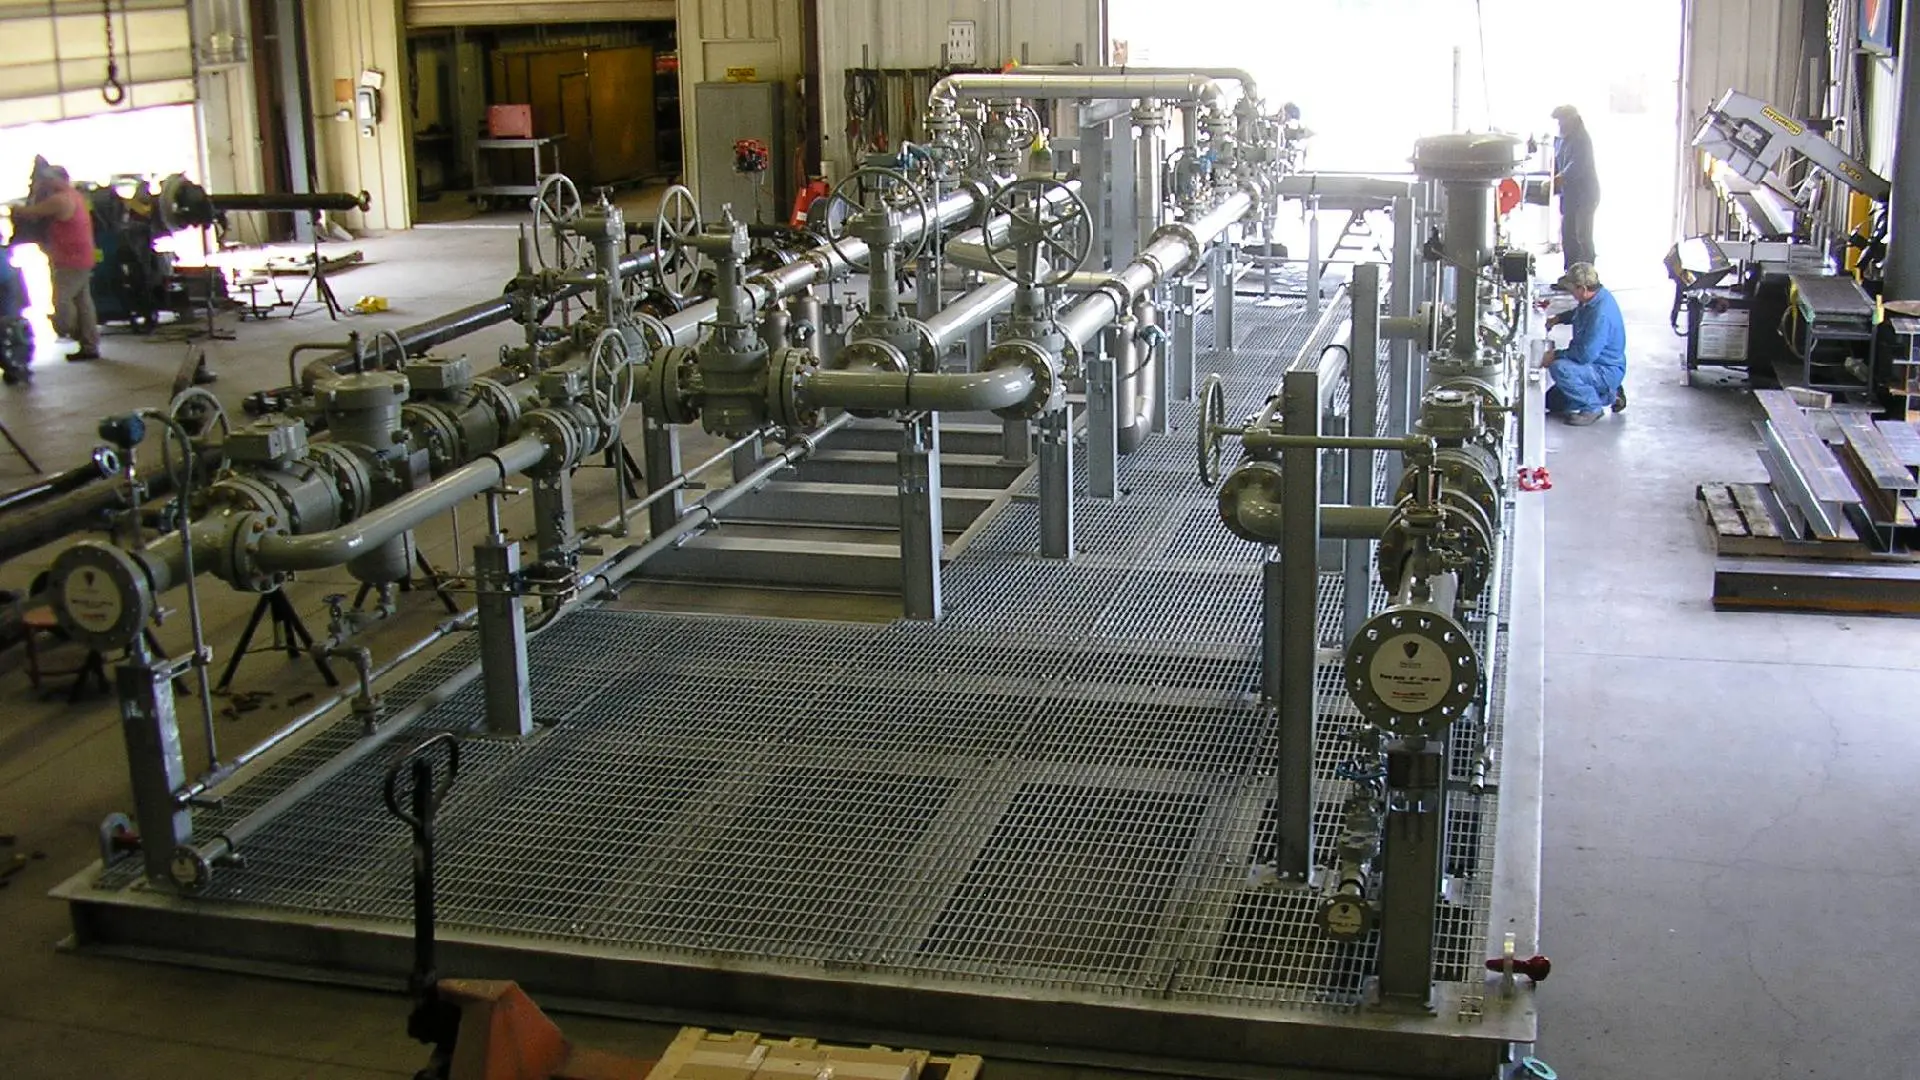 A large metal platform with pipes and valves.